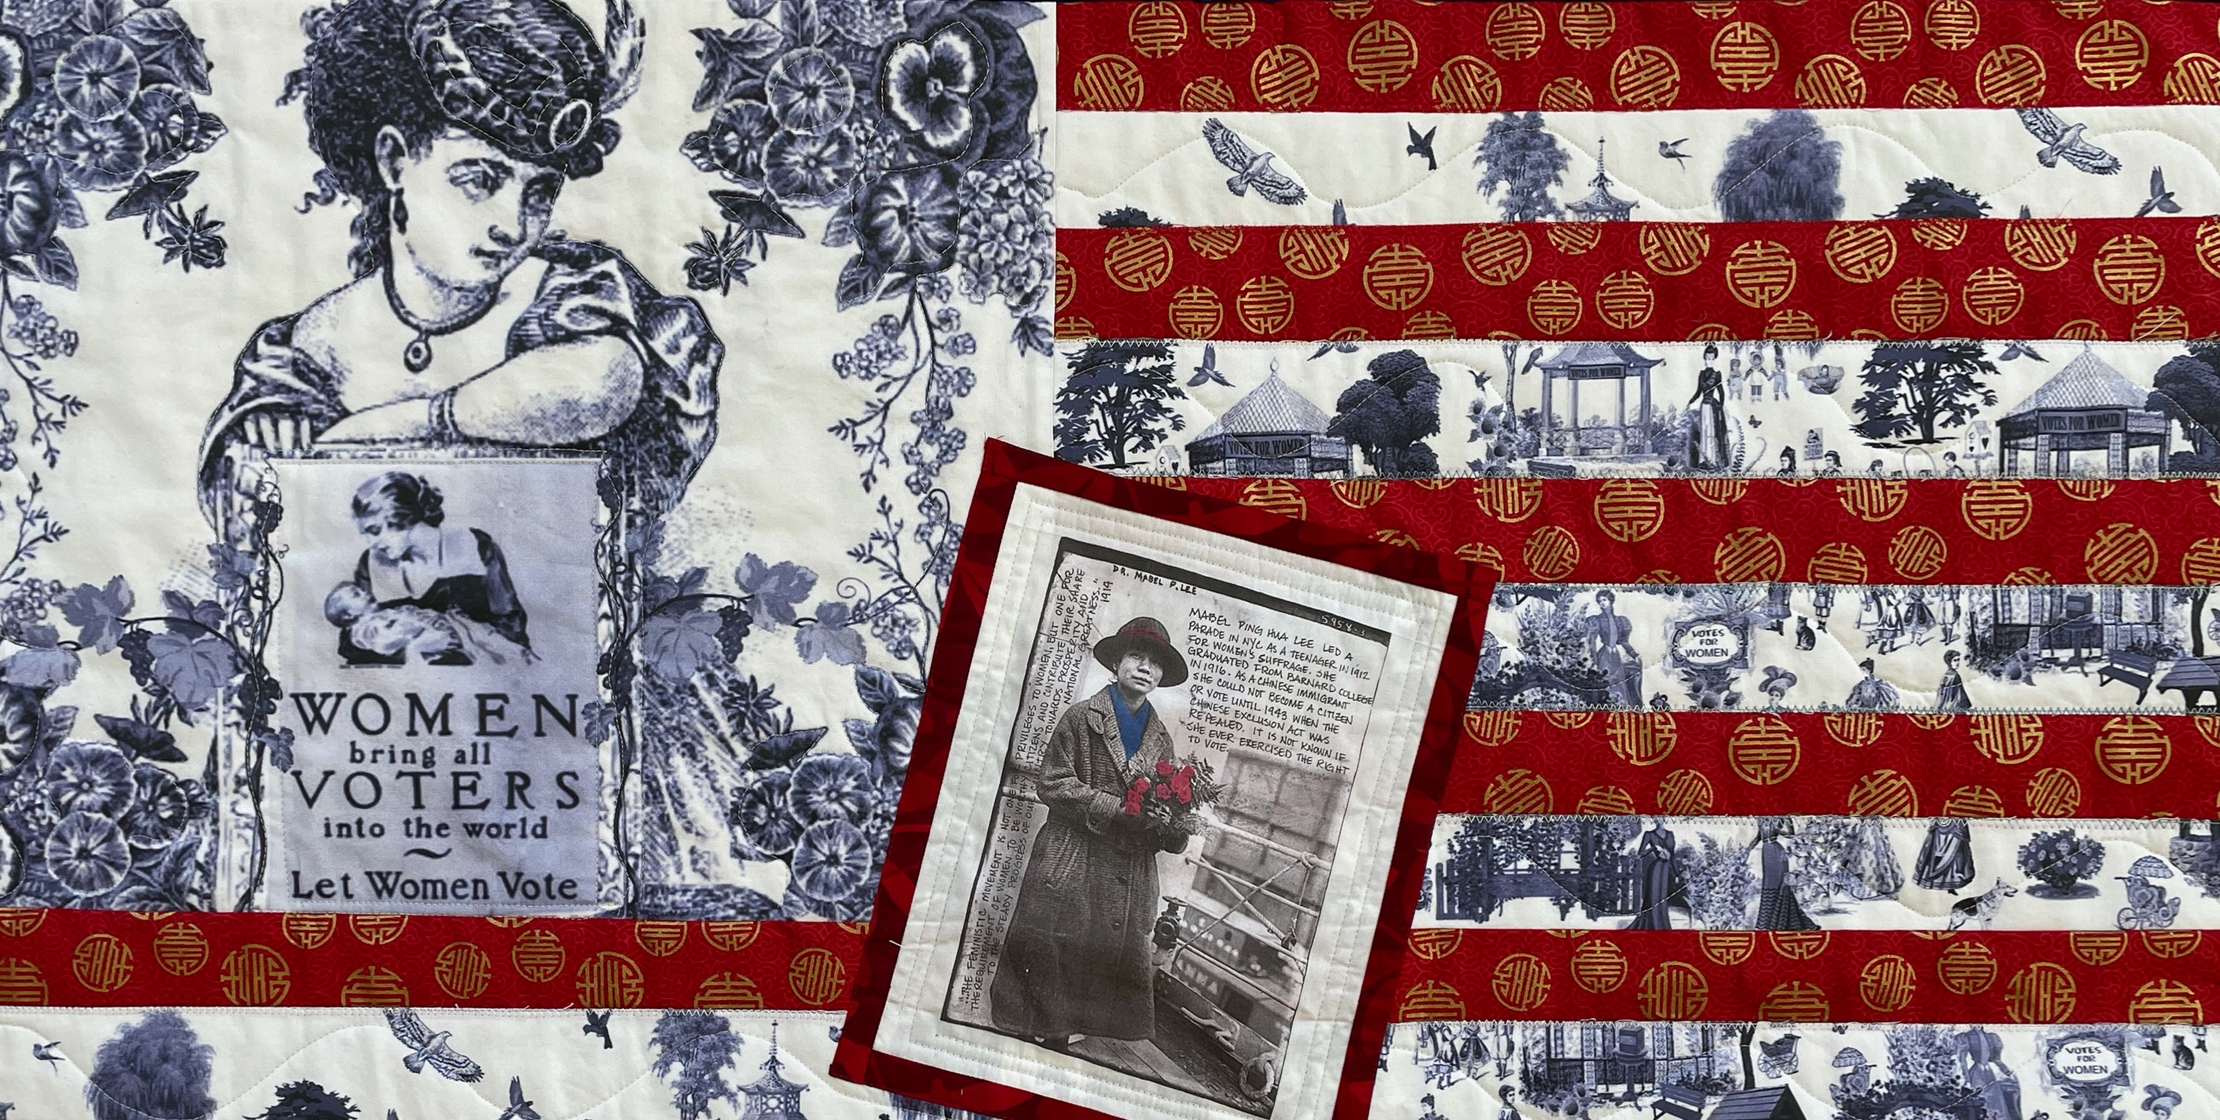 A quilt blending elements of the American flag with historical portraits of women.